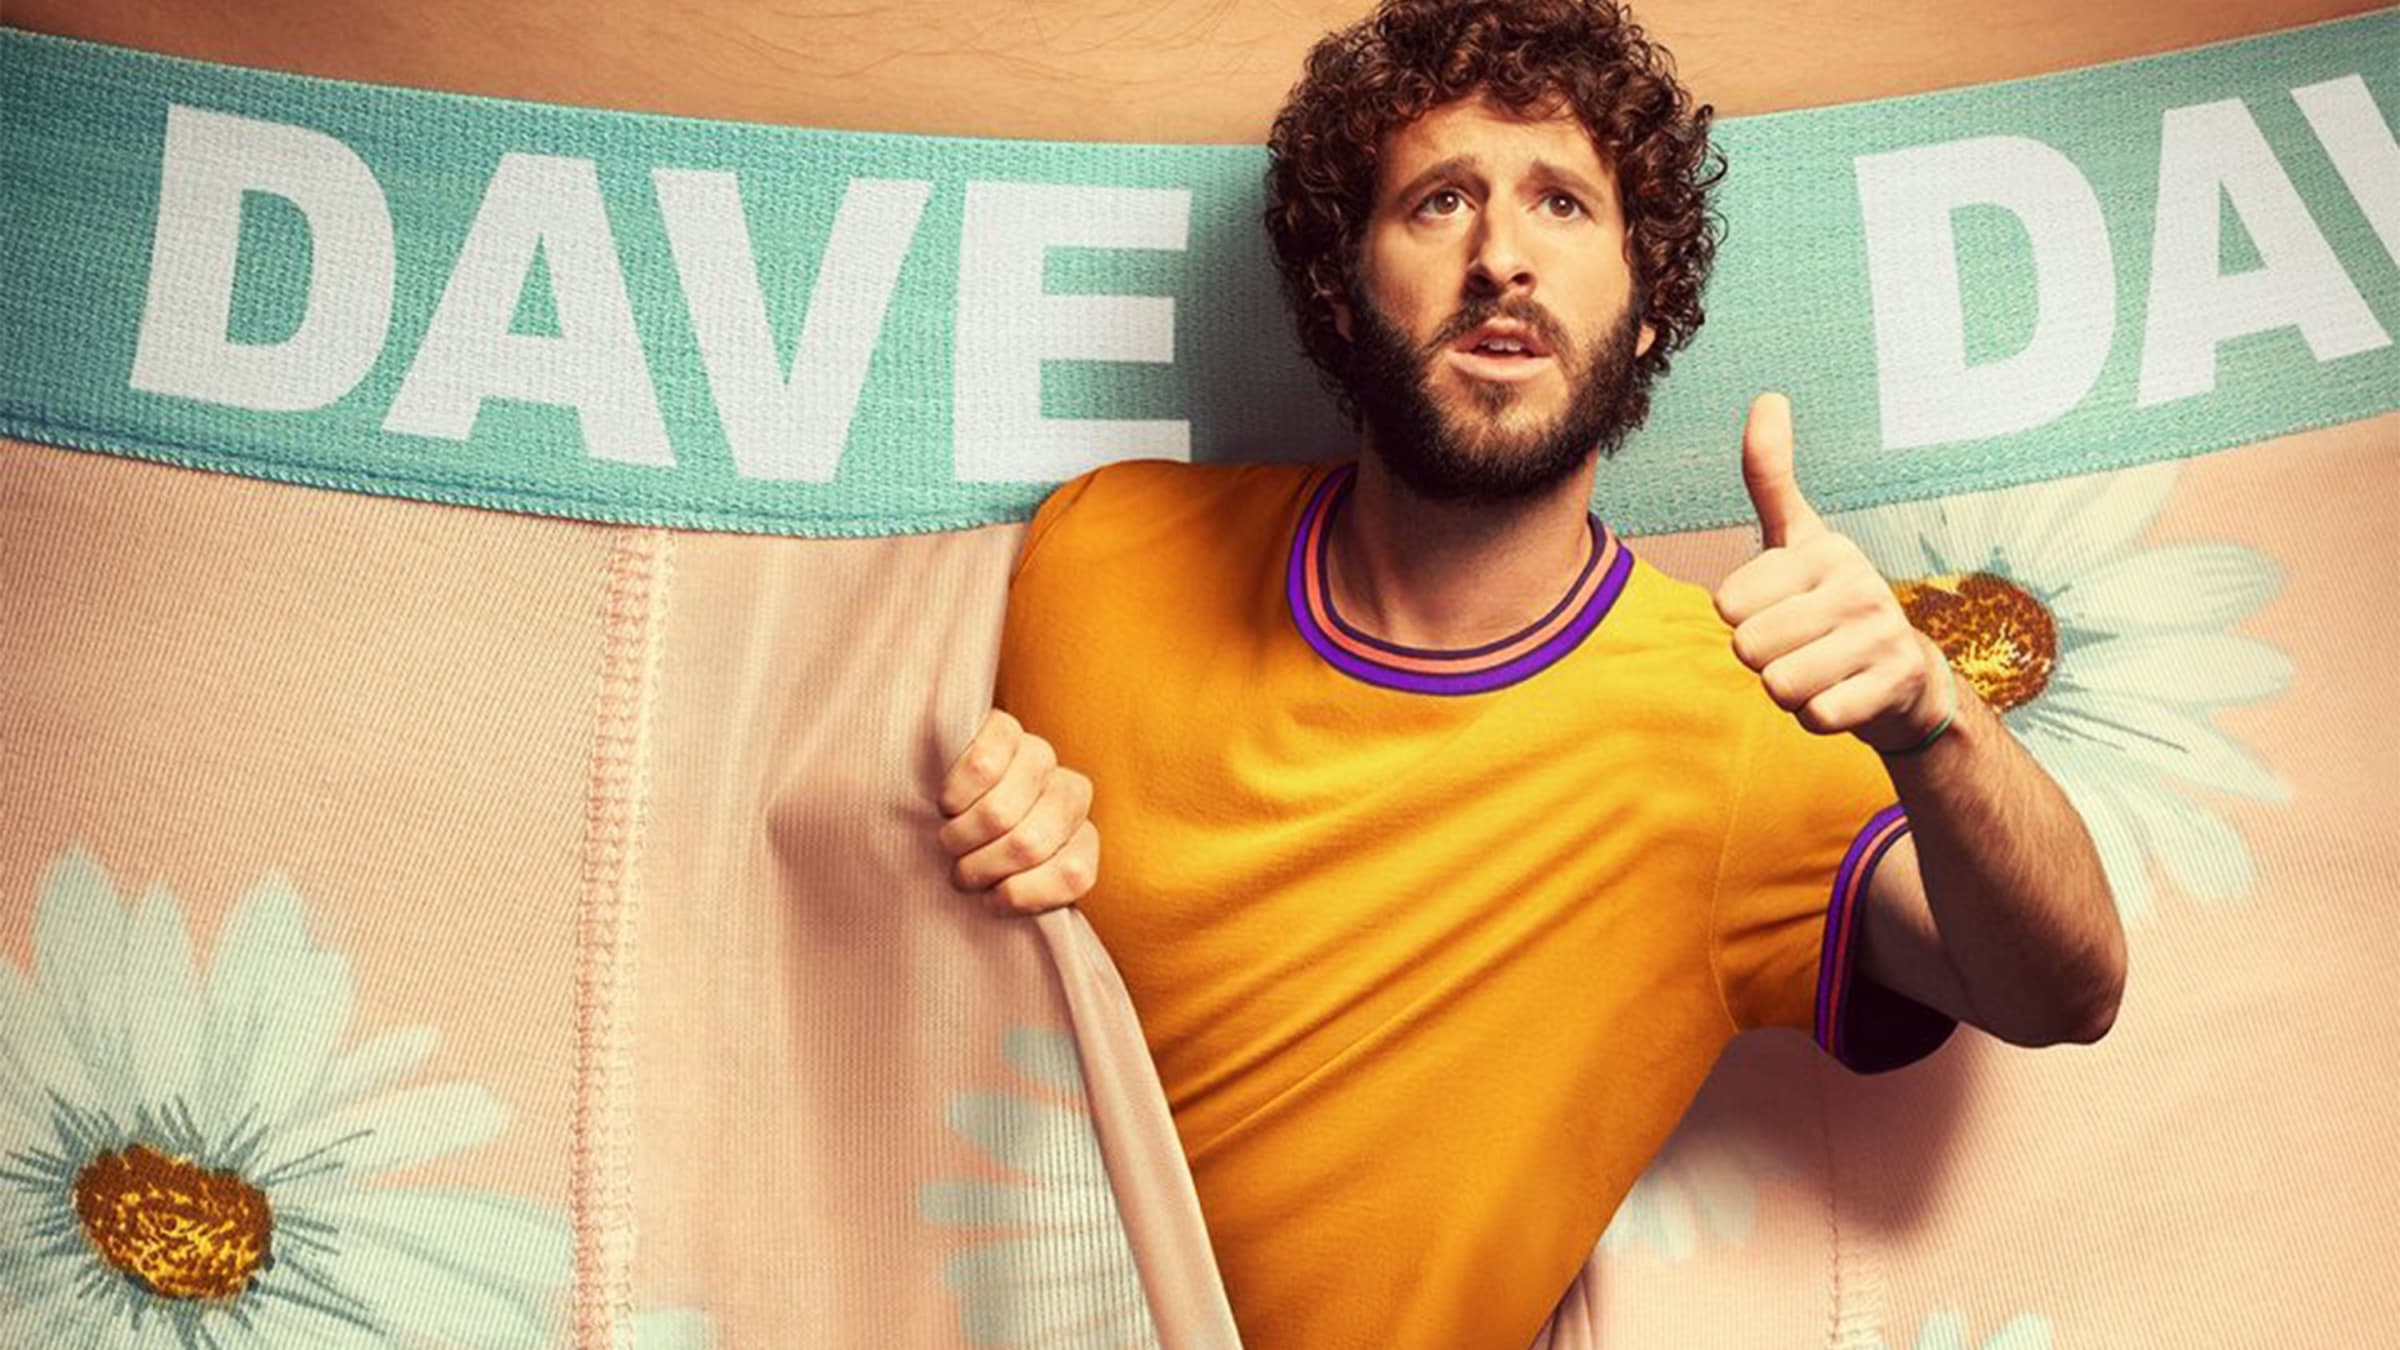 Dave Star Lil Dicky Has a Small, Strange Penis